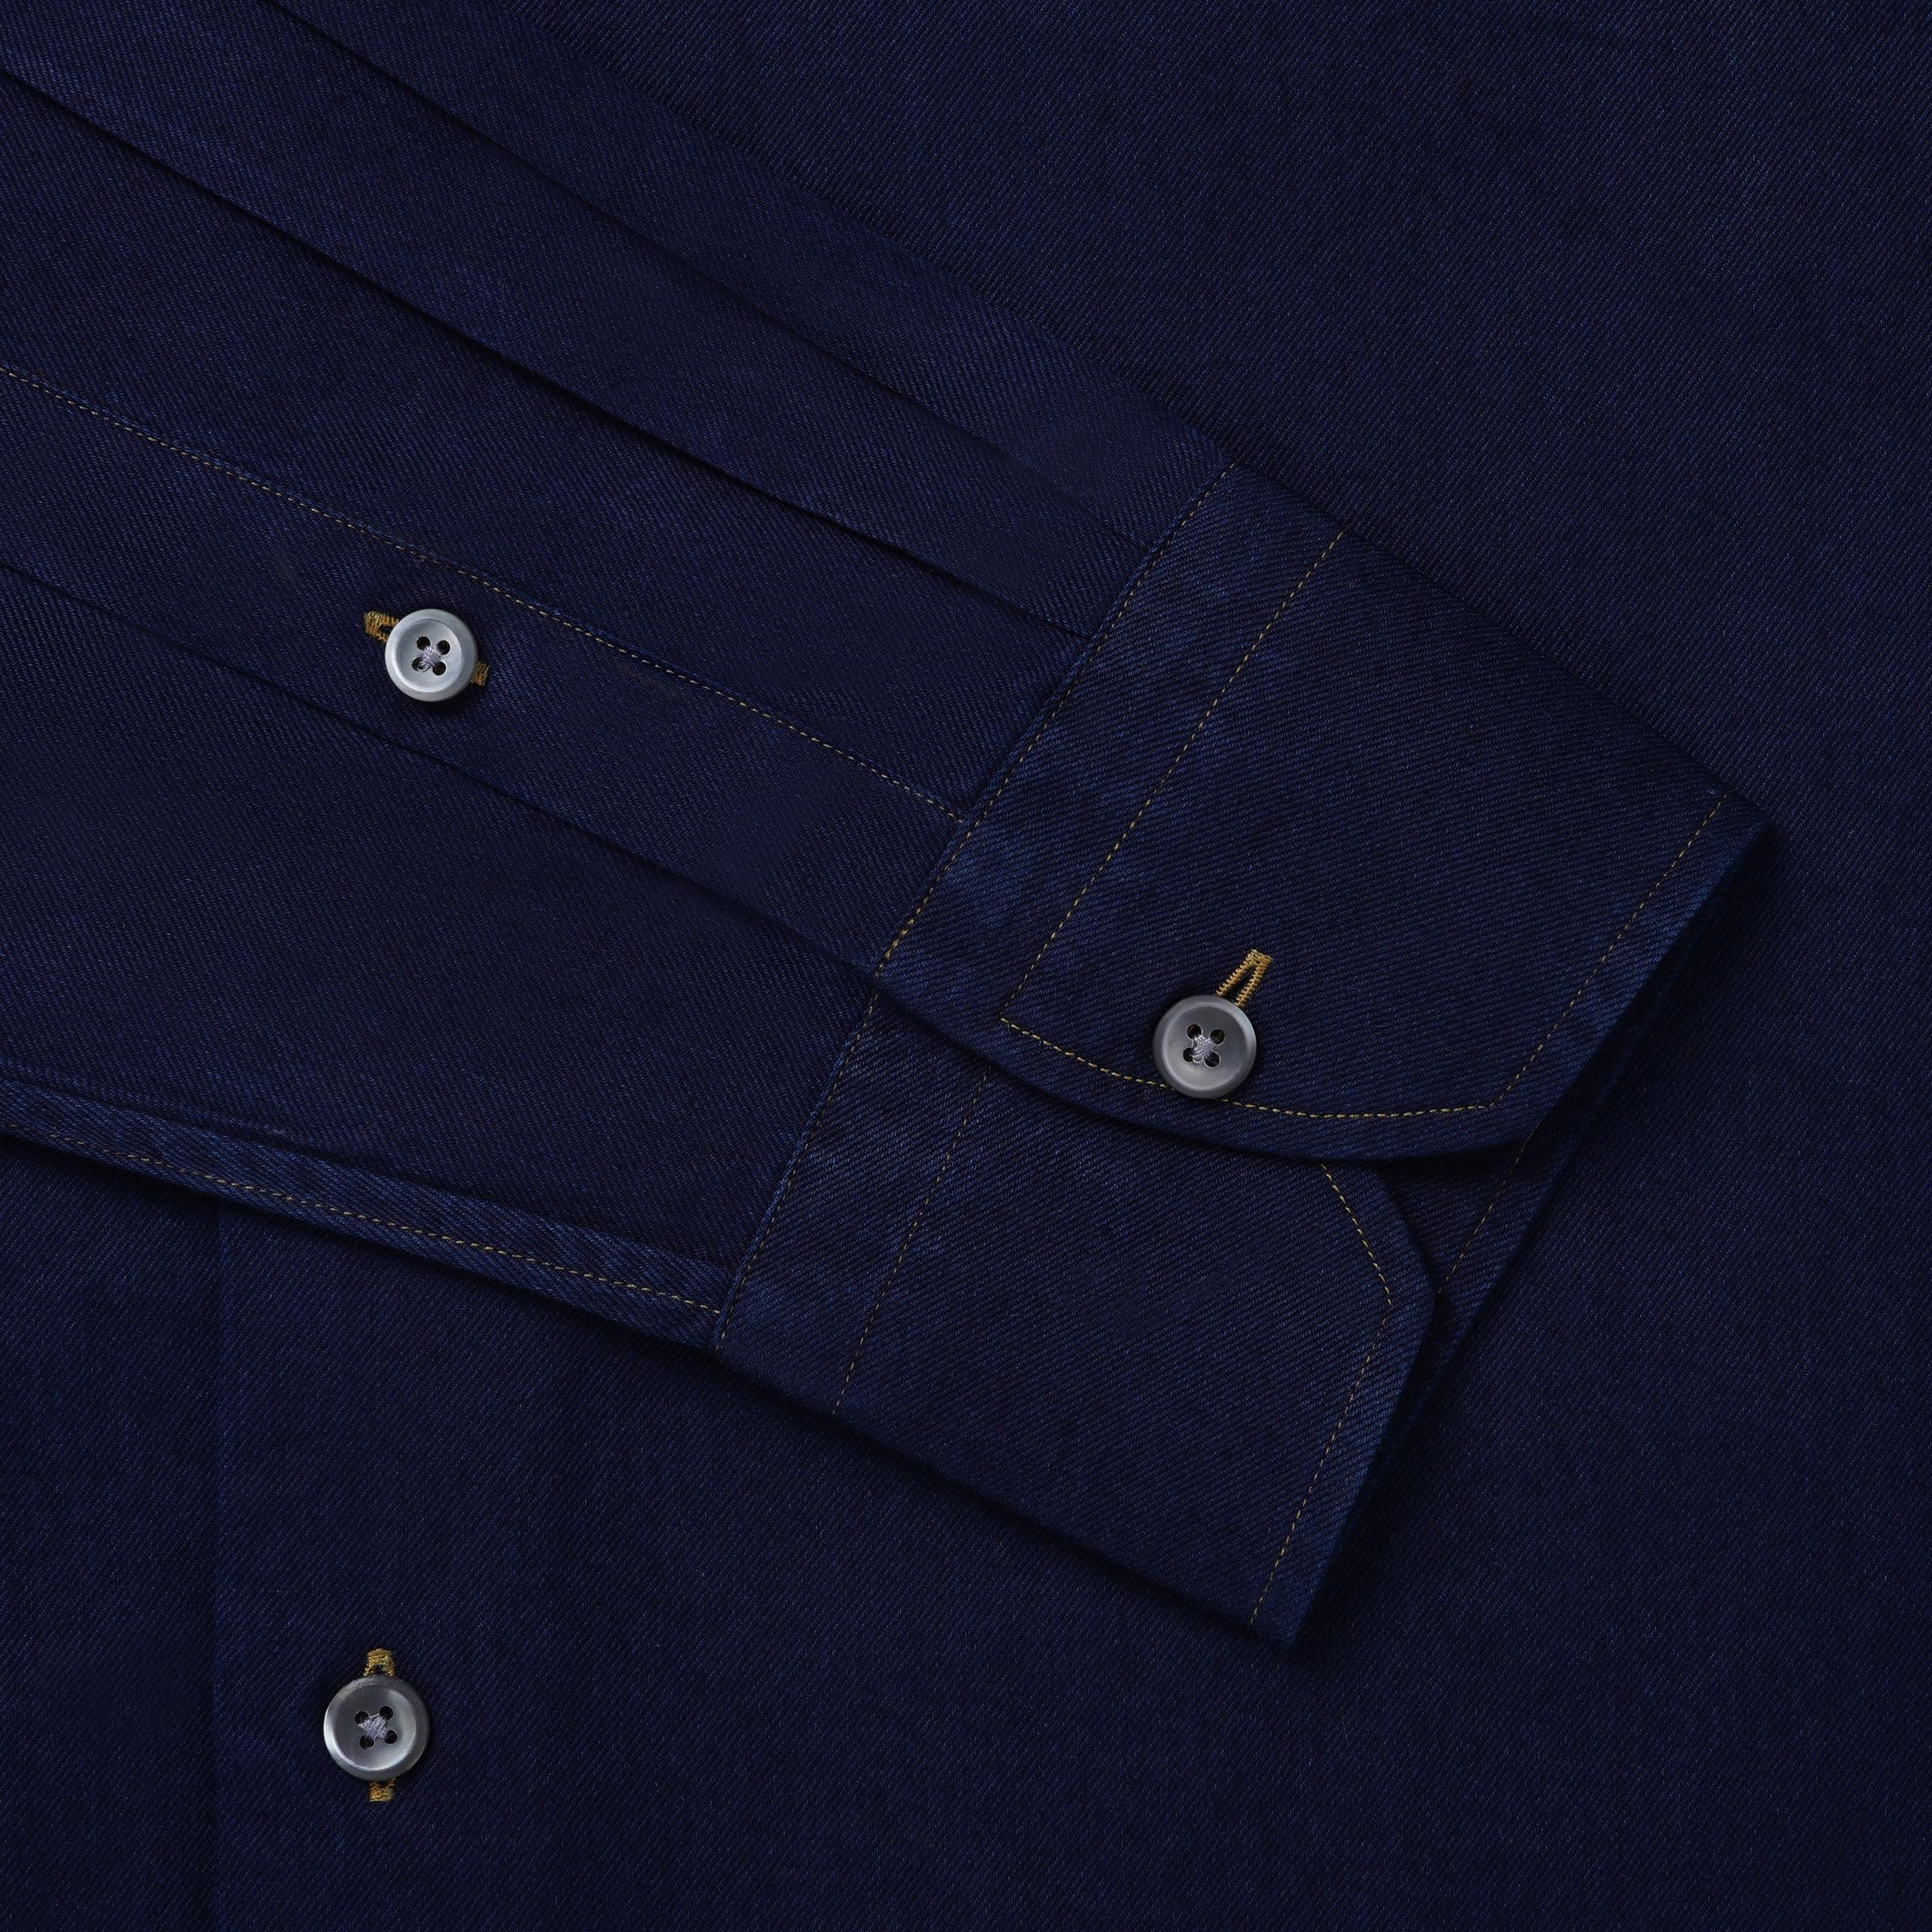 Navy Blue Tailored Fit Smart Casual Cotton Twill Shirt